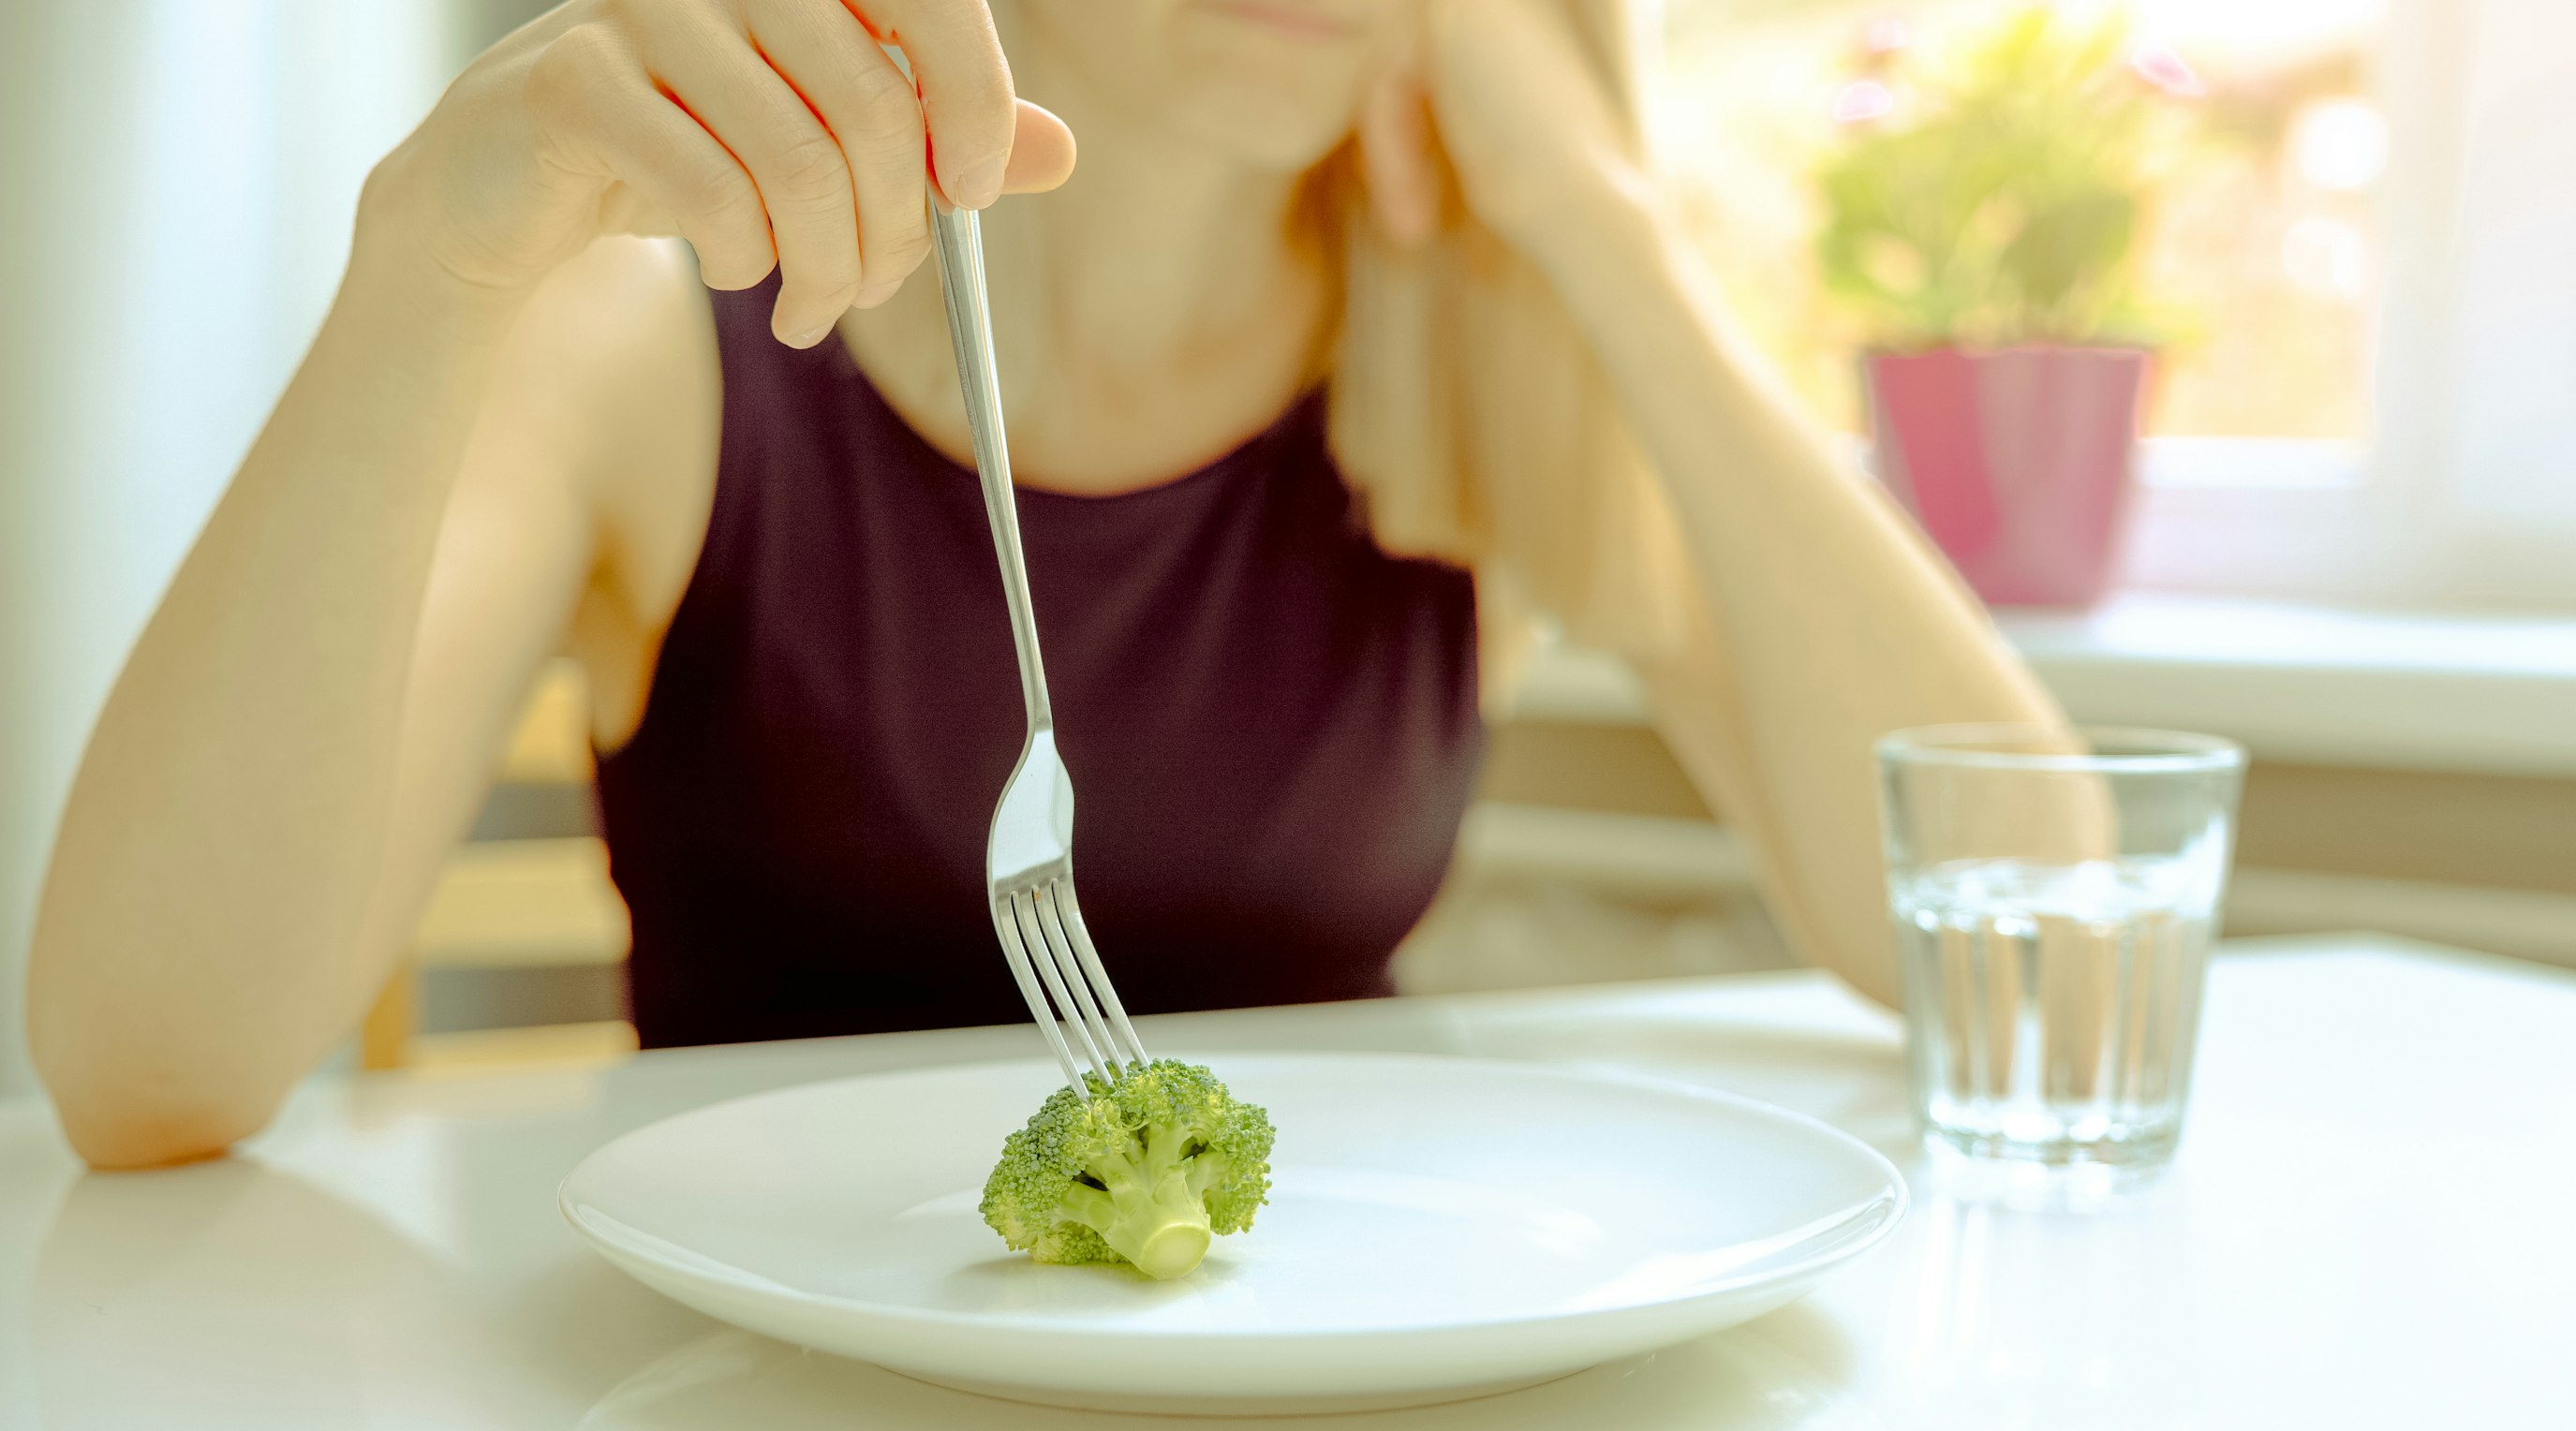 The potential benefits of medicinal cannabis for eating disorders